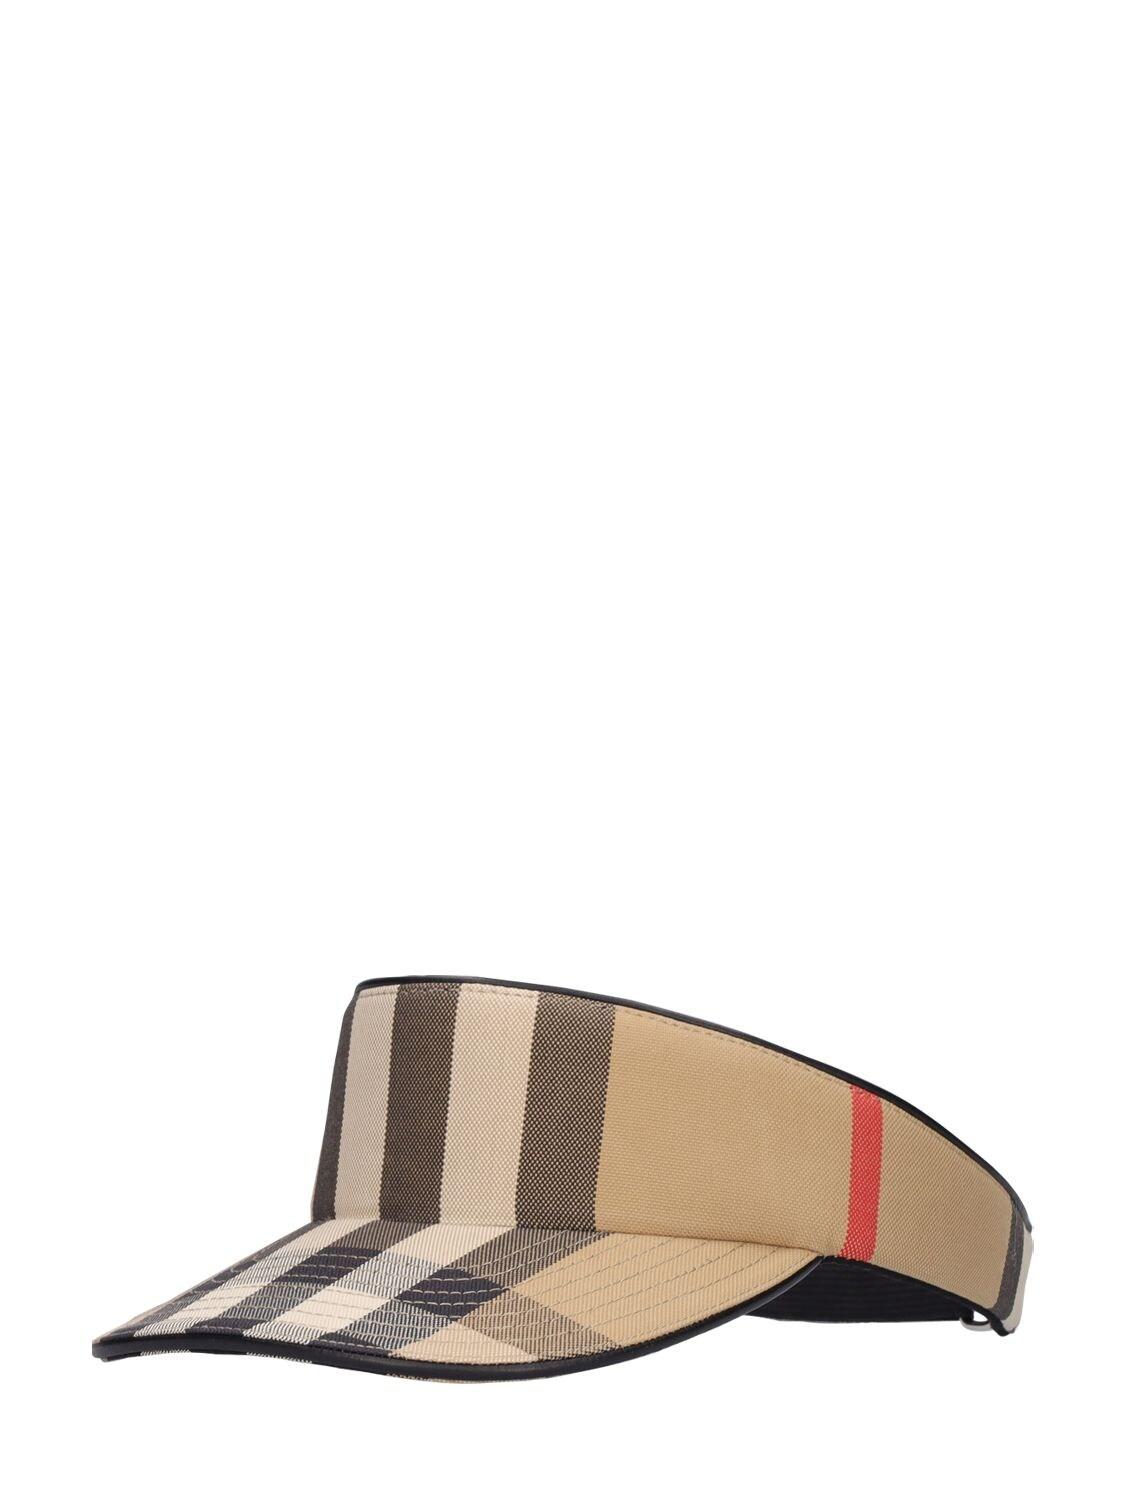 Burberry Check Cotton Visor in Natural Womens Mens Accessories Mens Hats 